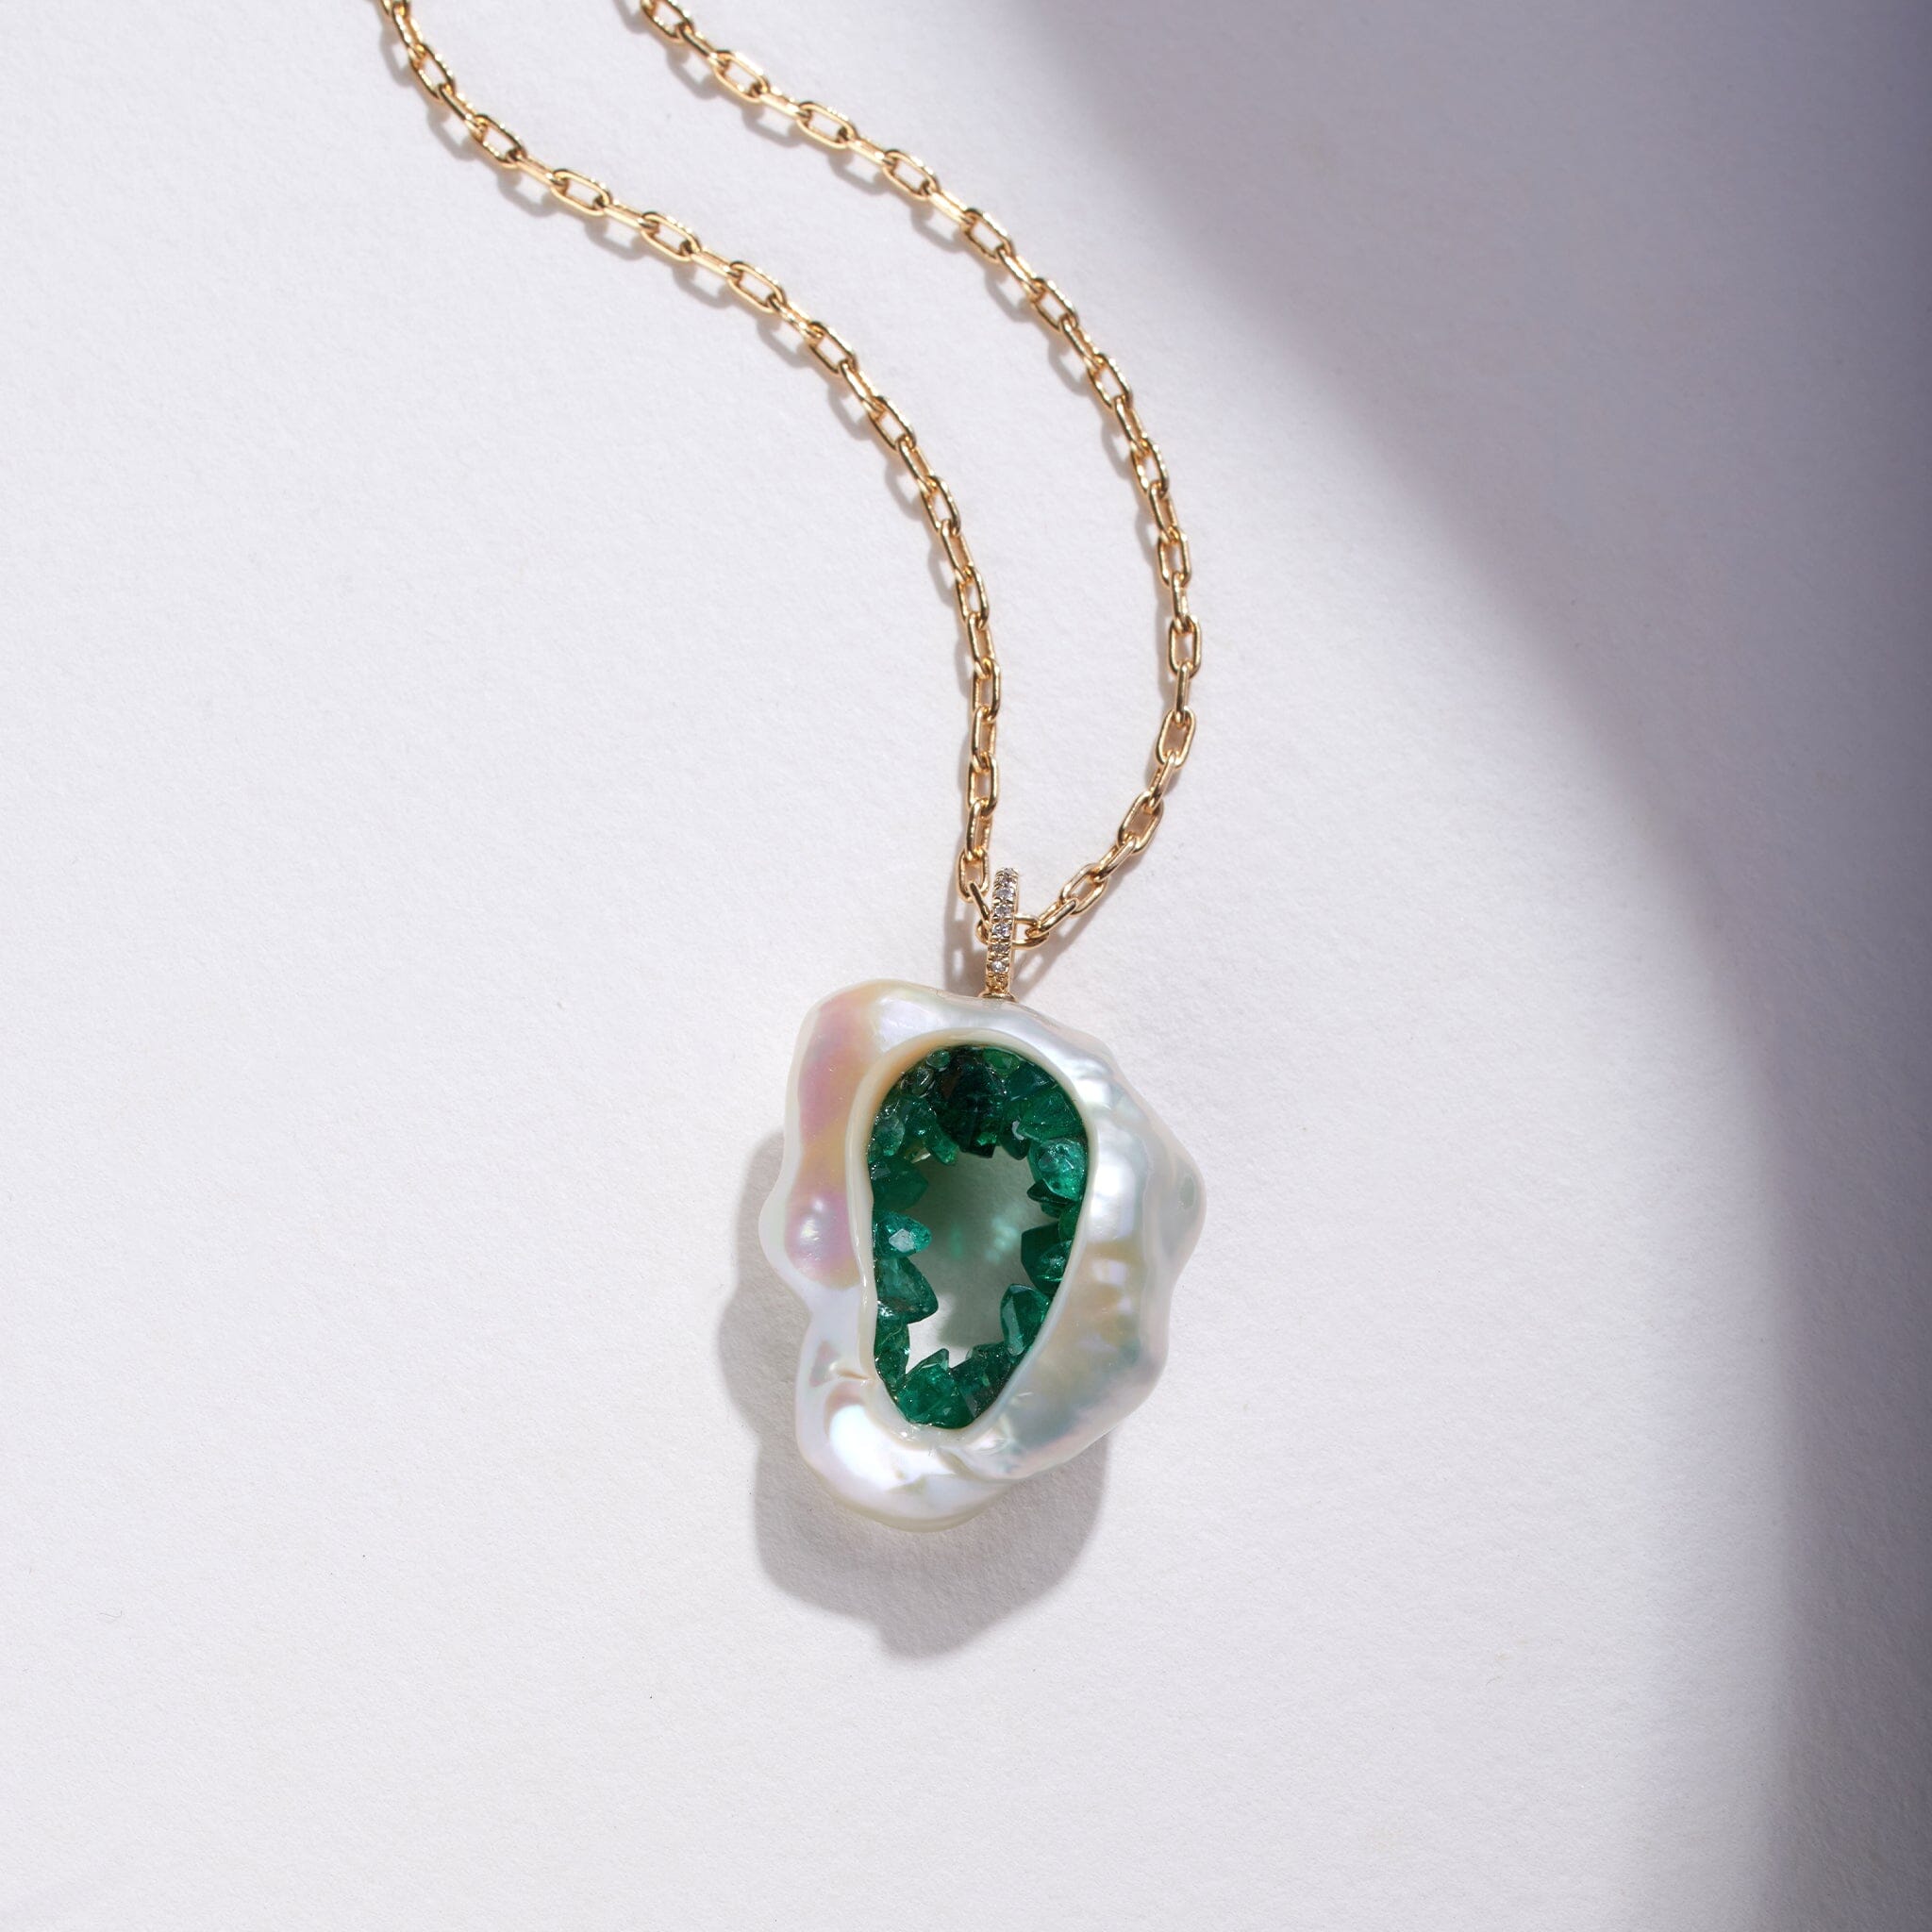 Freshwater Souffle Pearl Grotto Pendant with Emeralds and Diamond Bail